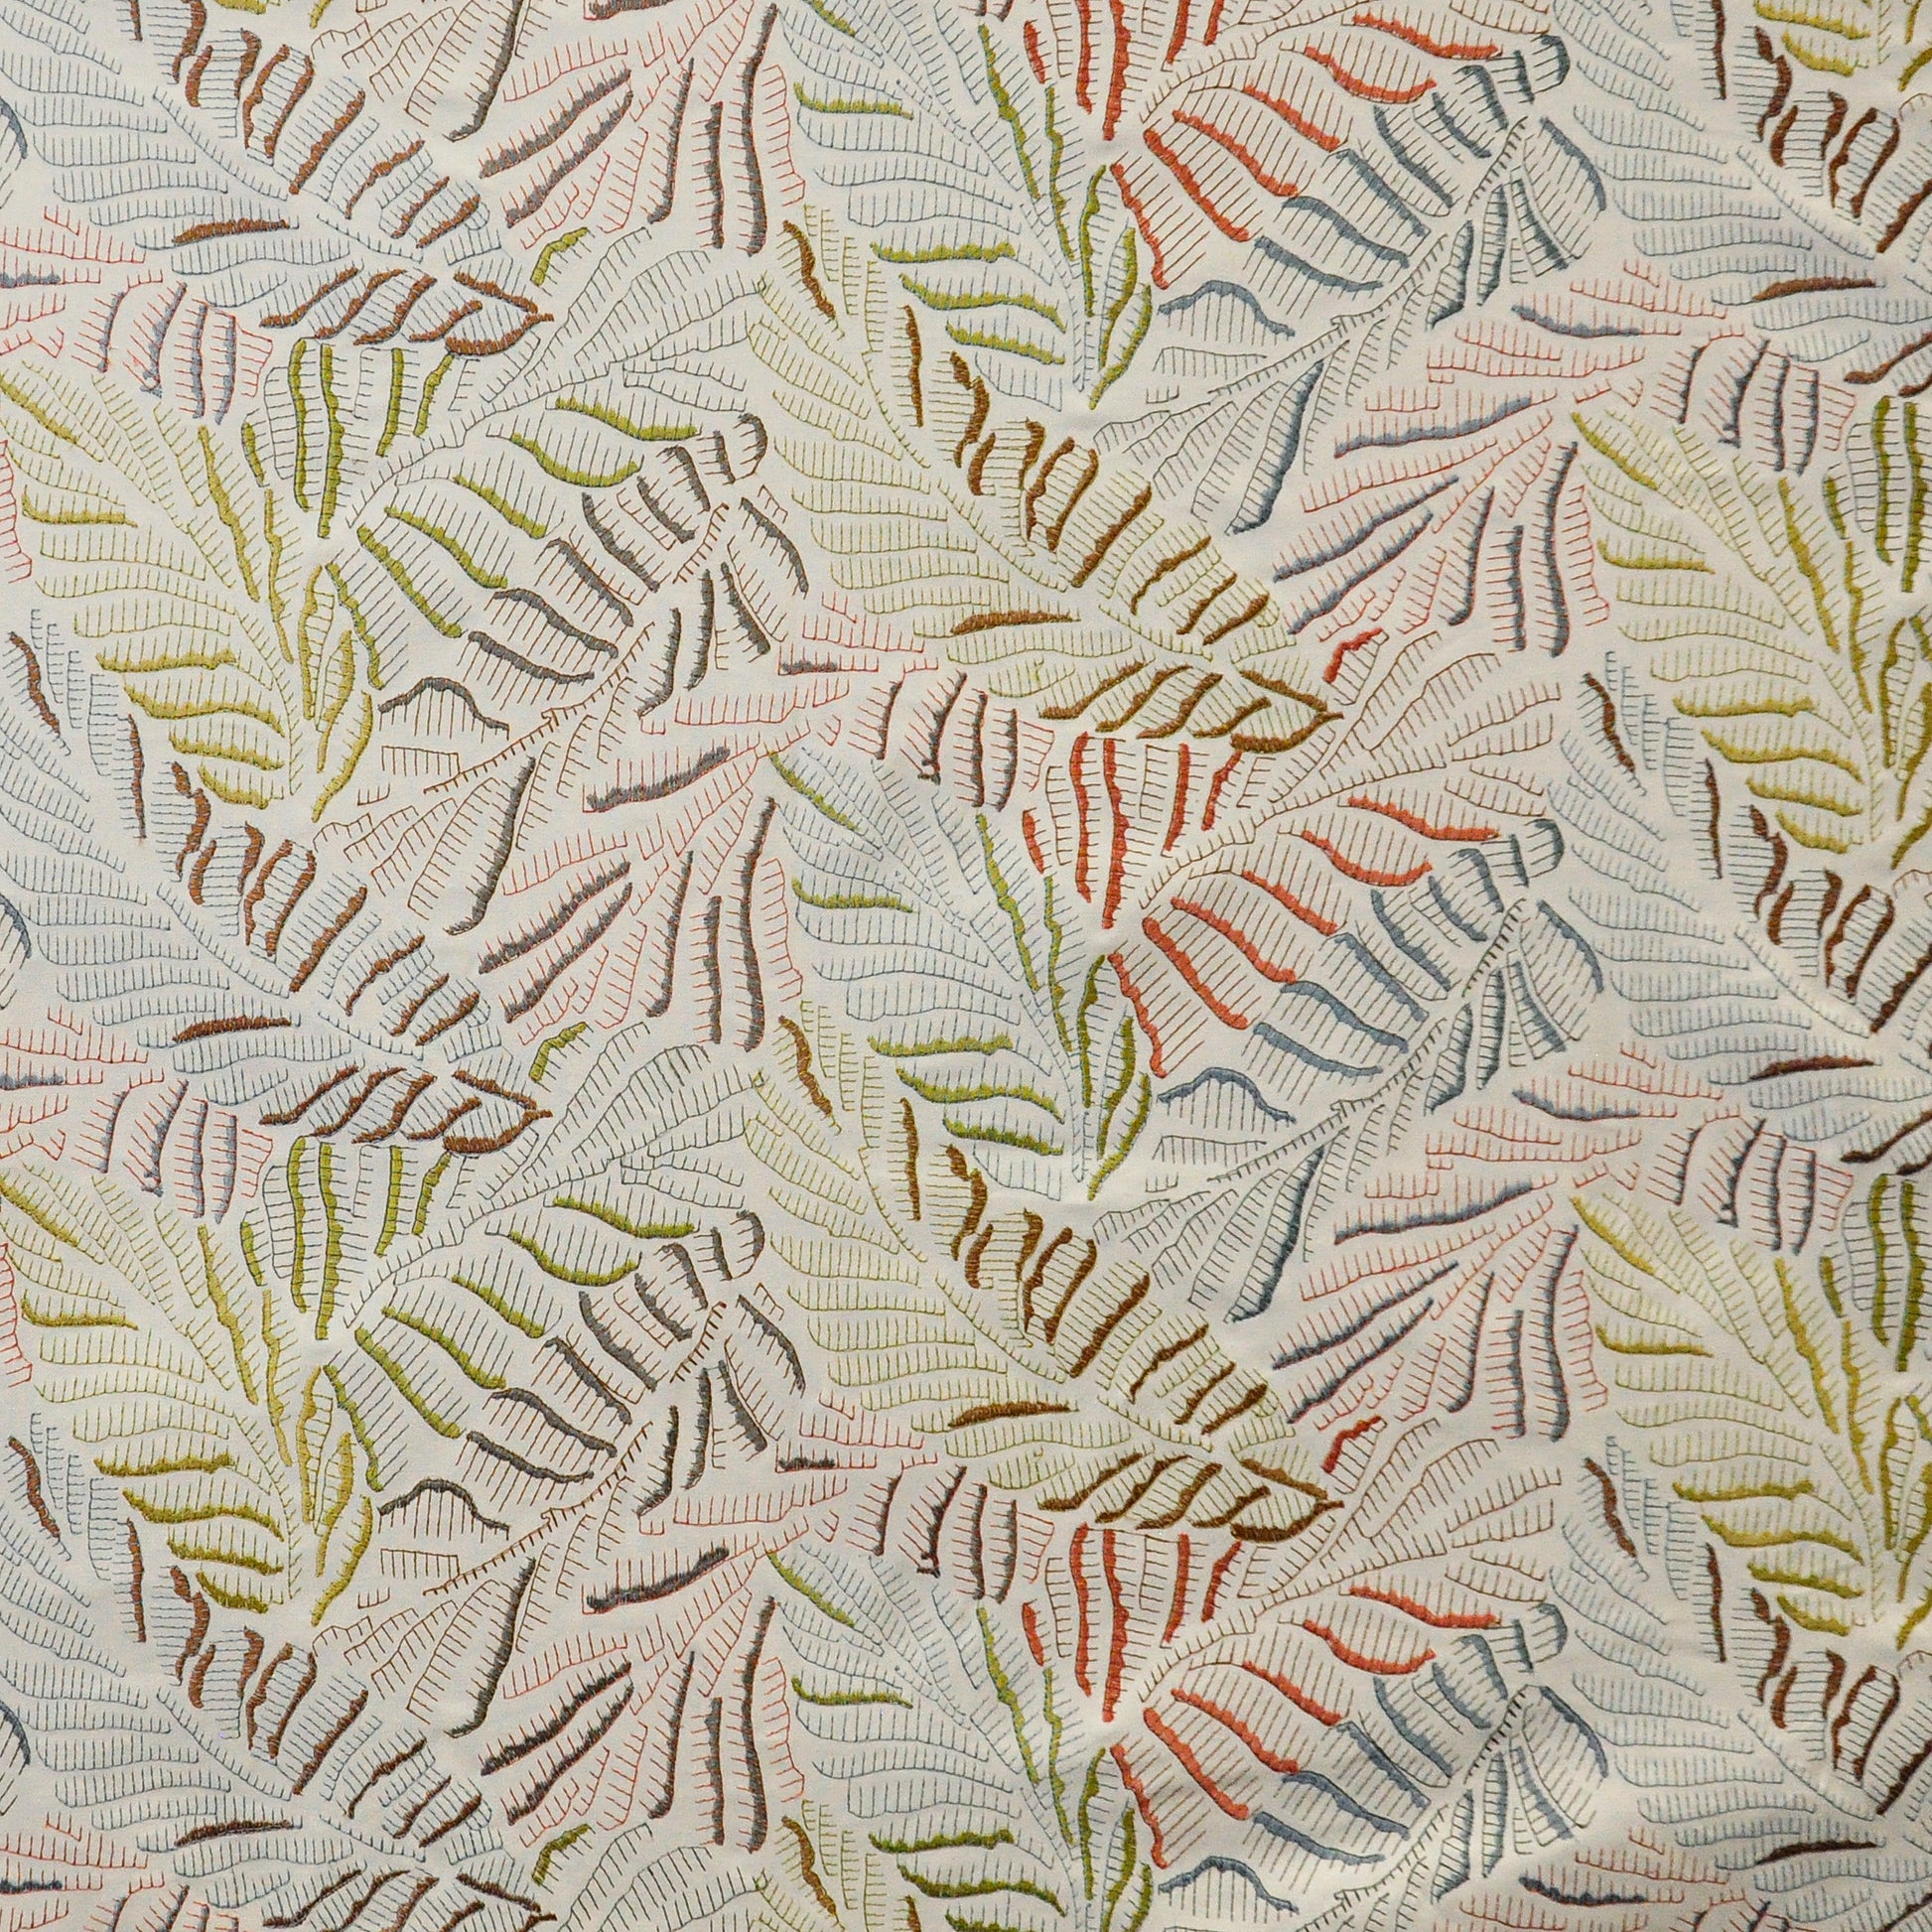 Purchase Maxwell Fabric - Hazelden, # 701 Coral Reef